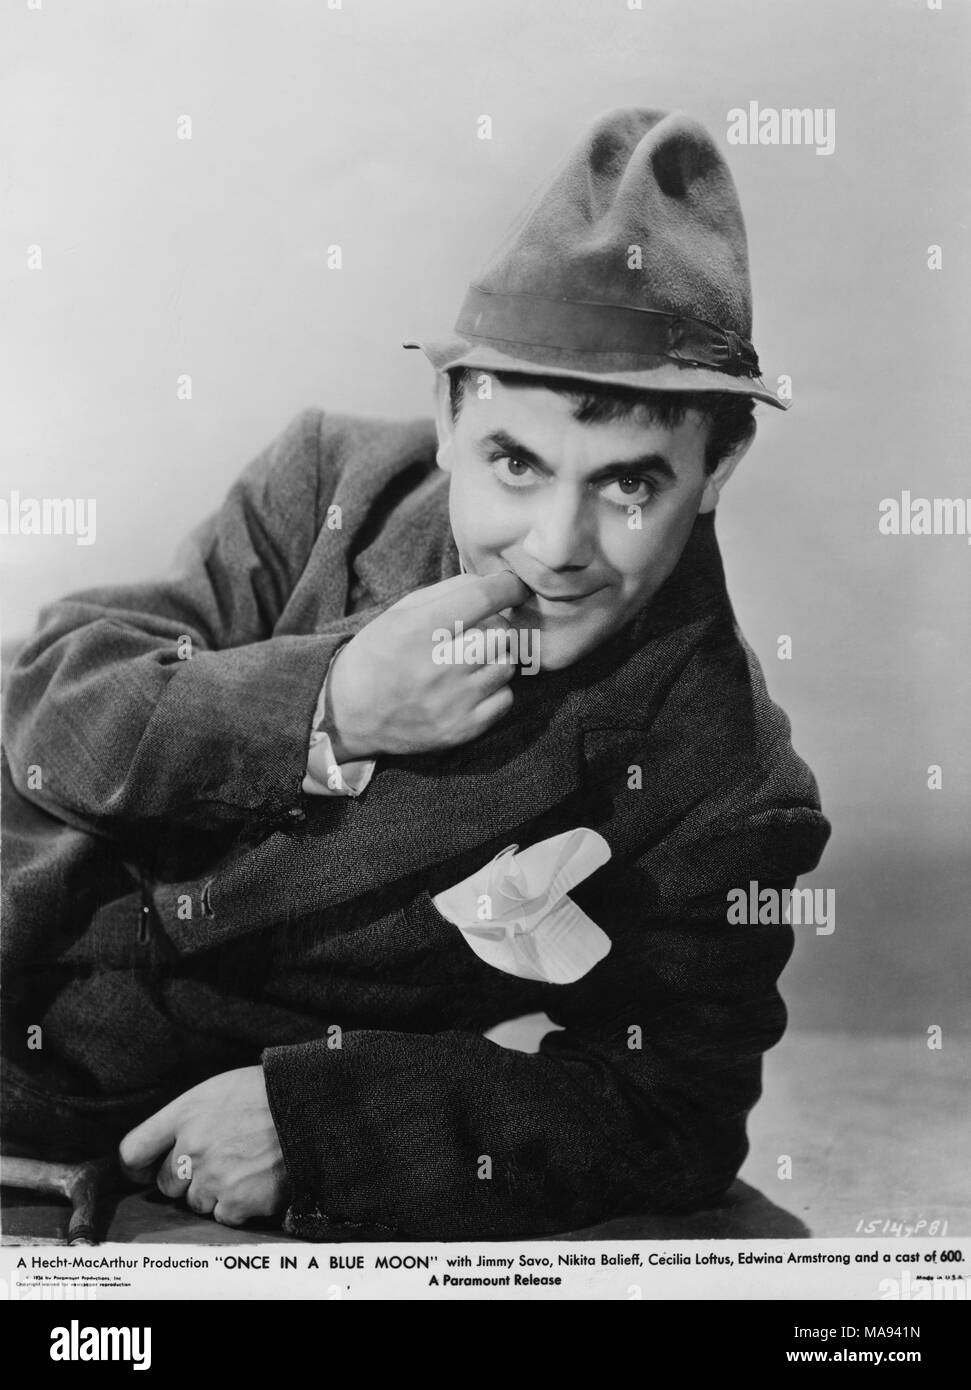 Jimmy Savo, Publicity Portrait for the Film, 'Once in a Blue Moon', Hecht-MacArthur Production, Paramount Pictures, 1935 Stock Photo